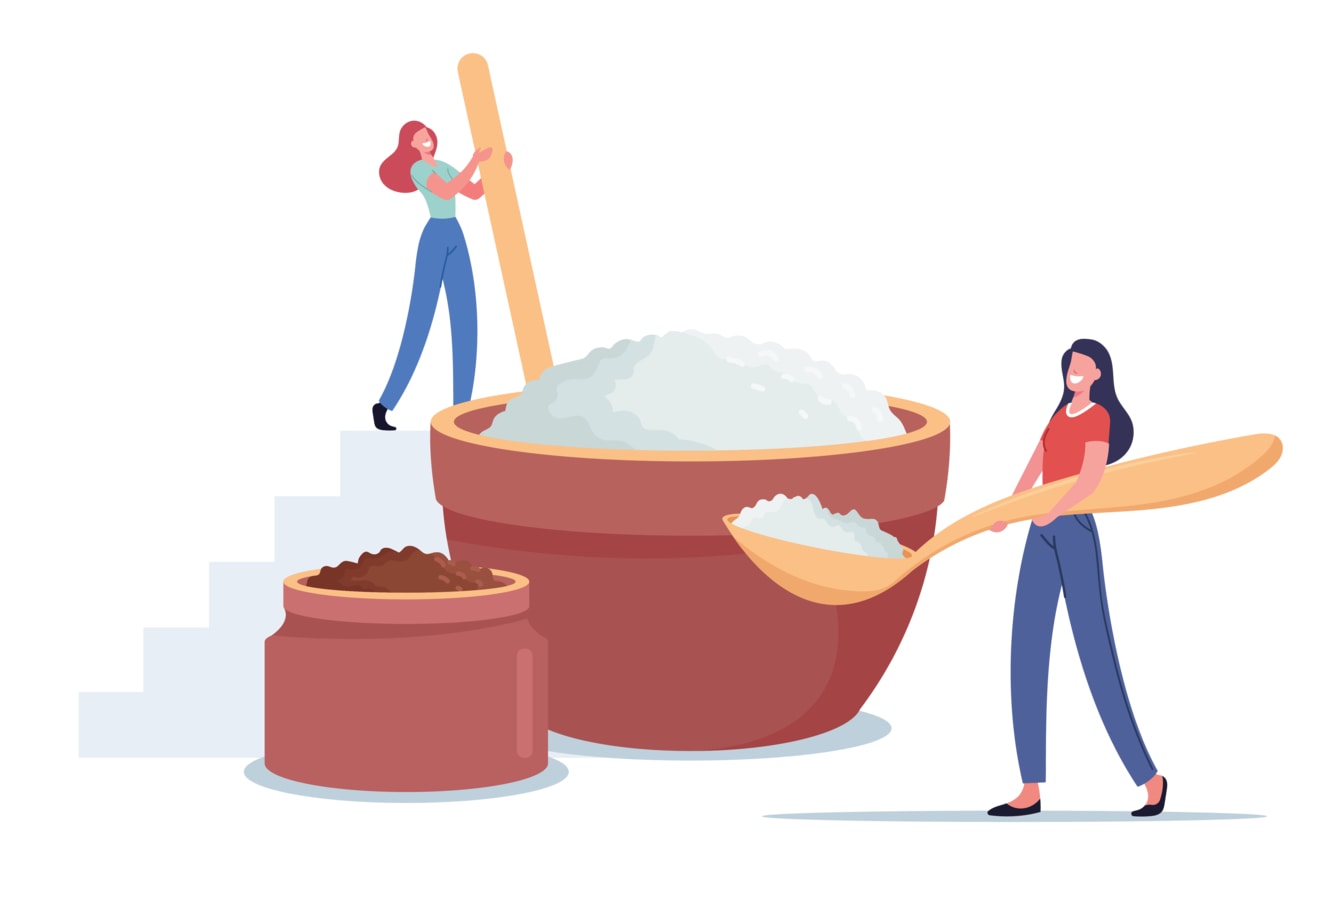 Illustration of two women taking salt out of a bowl, using spoons.